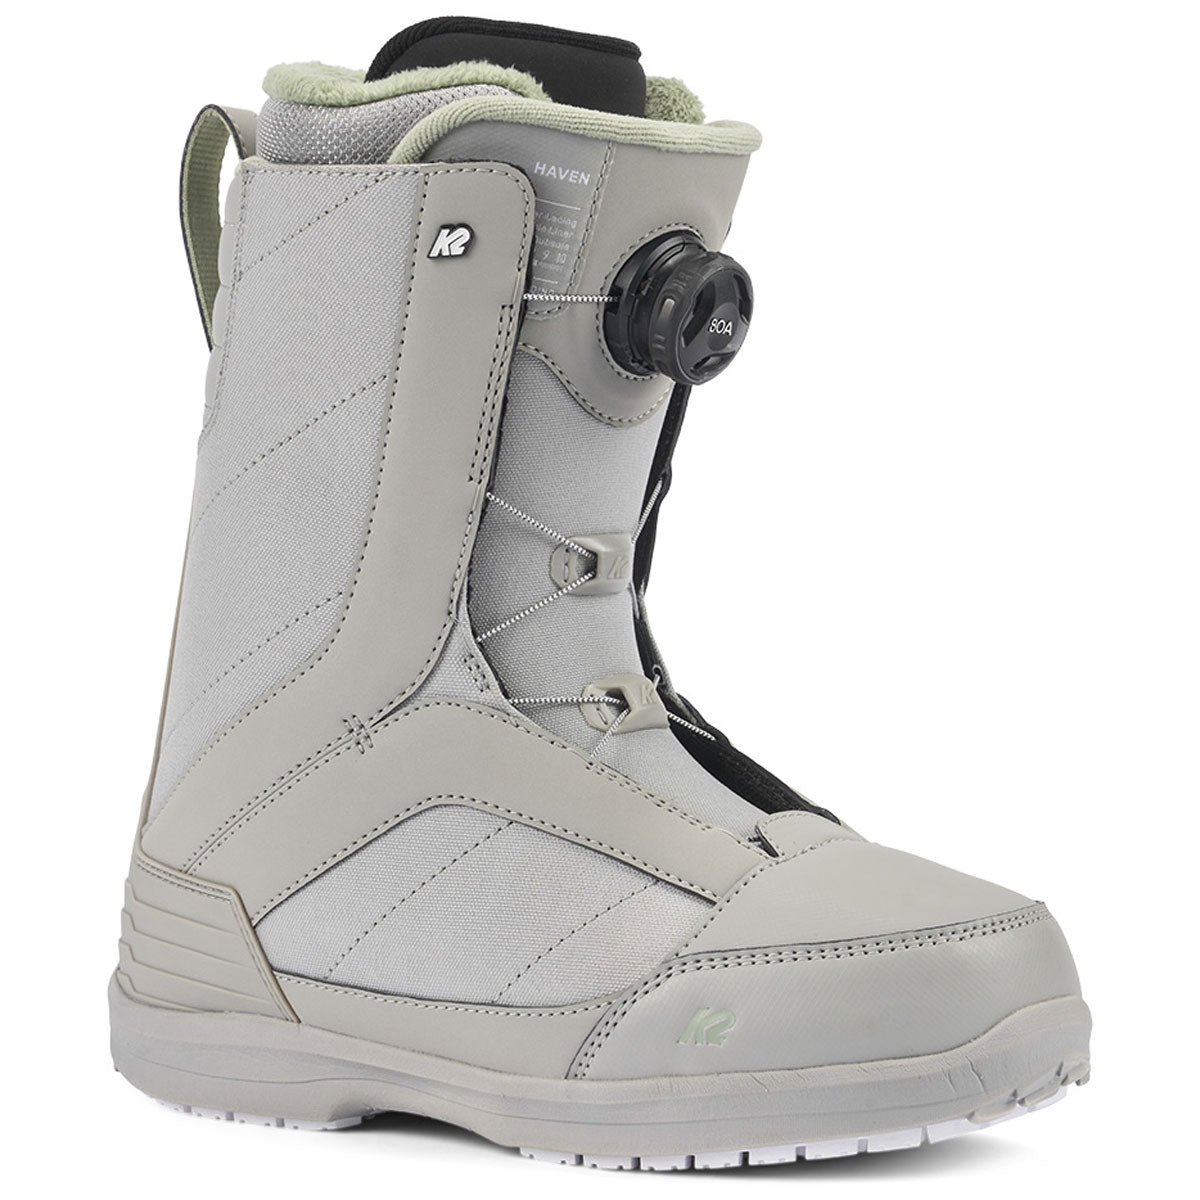 K2 Womens Haven 2024 Snowboard Boots - Grey image 1